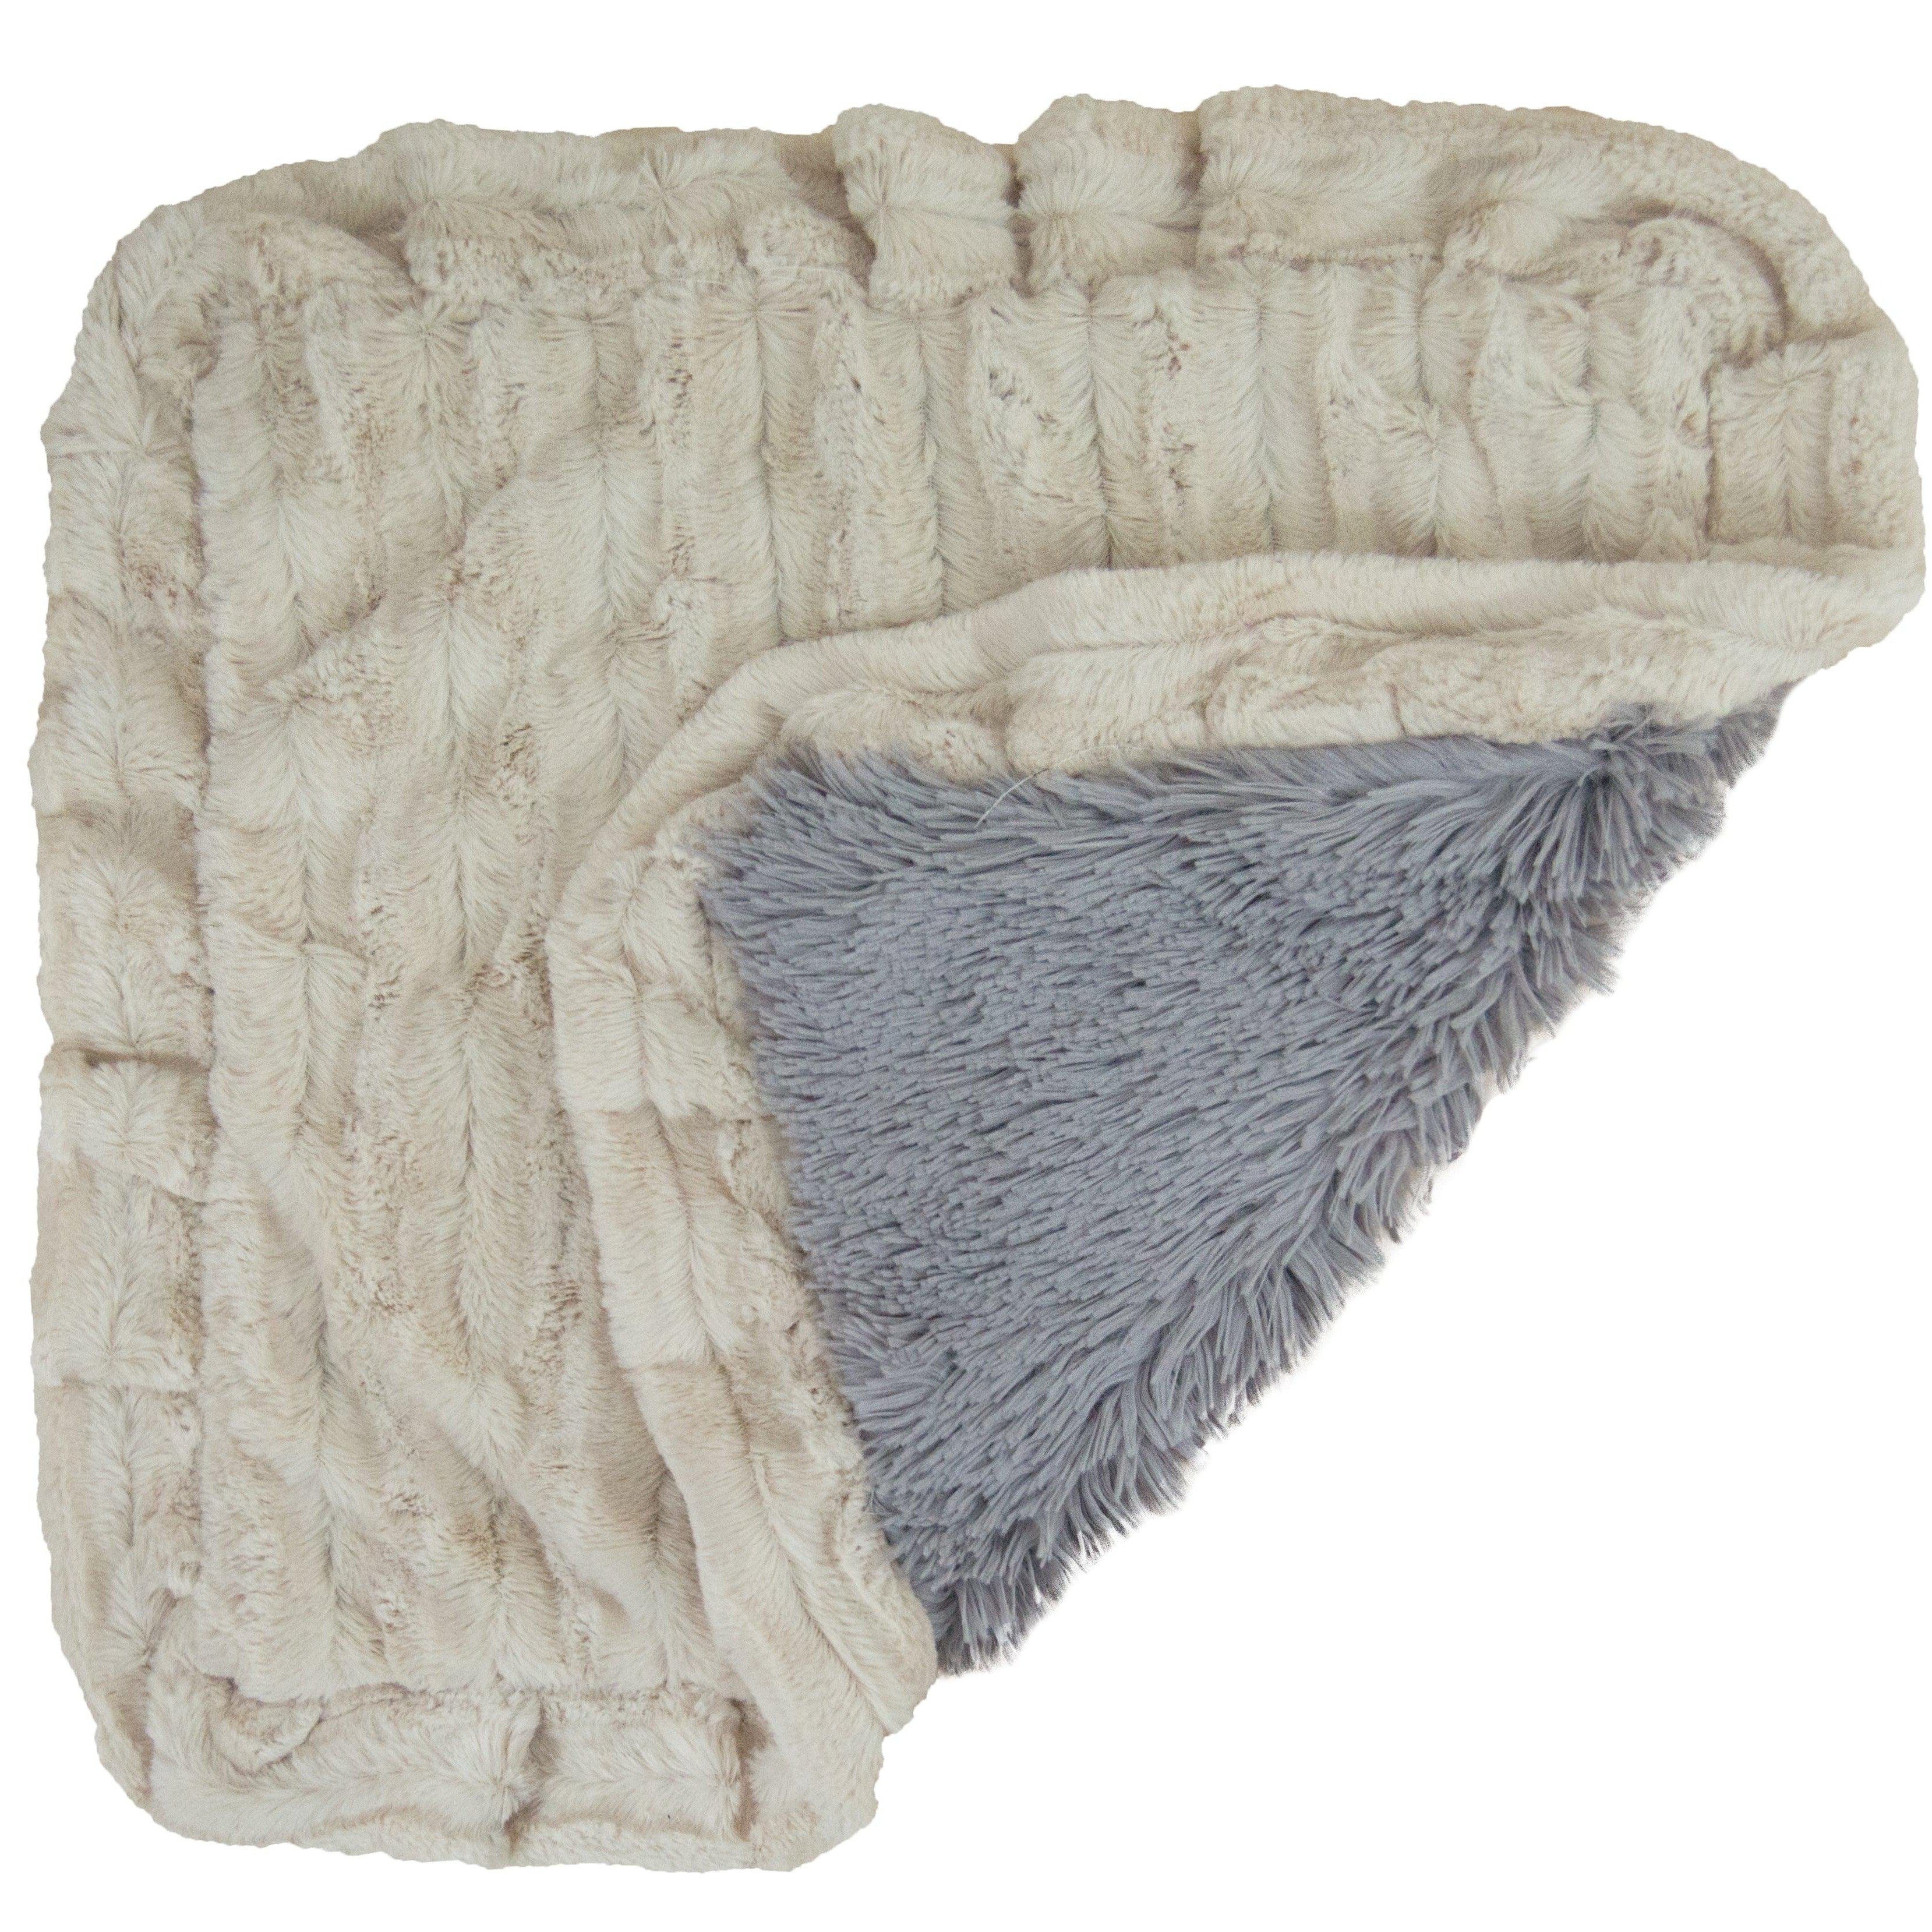 Blanket - Siberian Grey and Natural Beauty - Rocky & Maggie's Pet Boutique and Salon